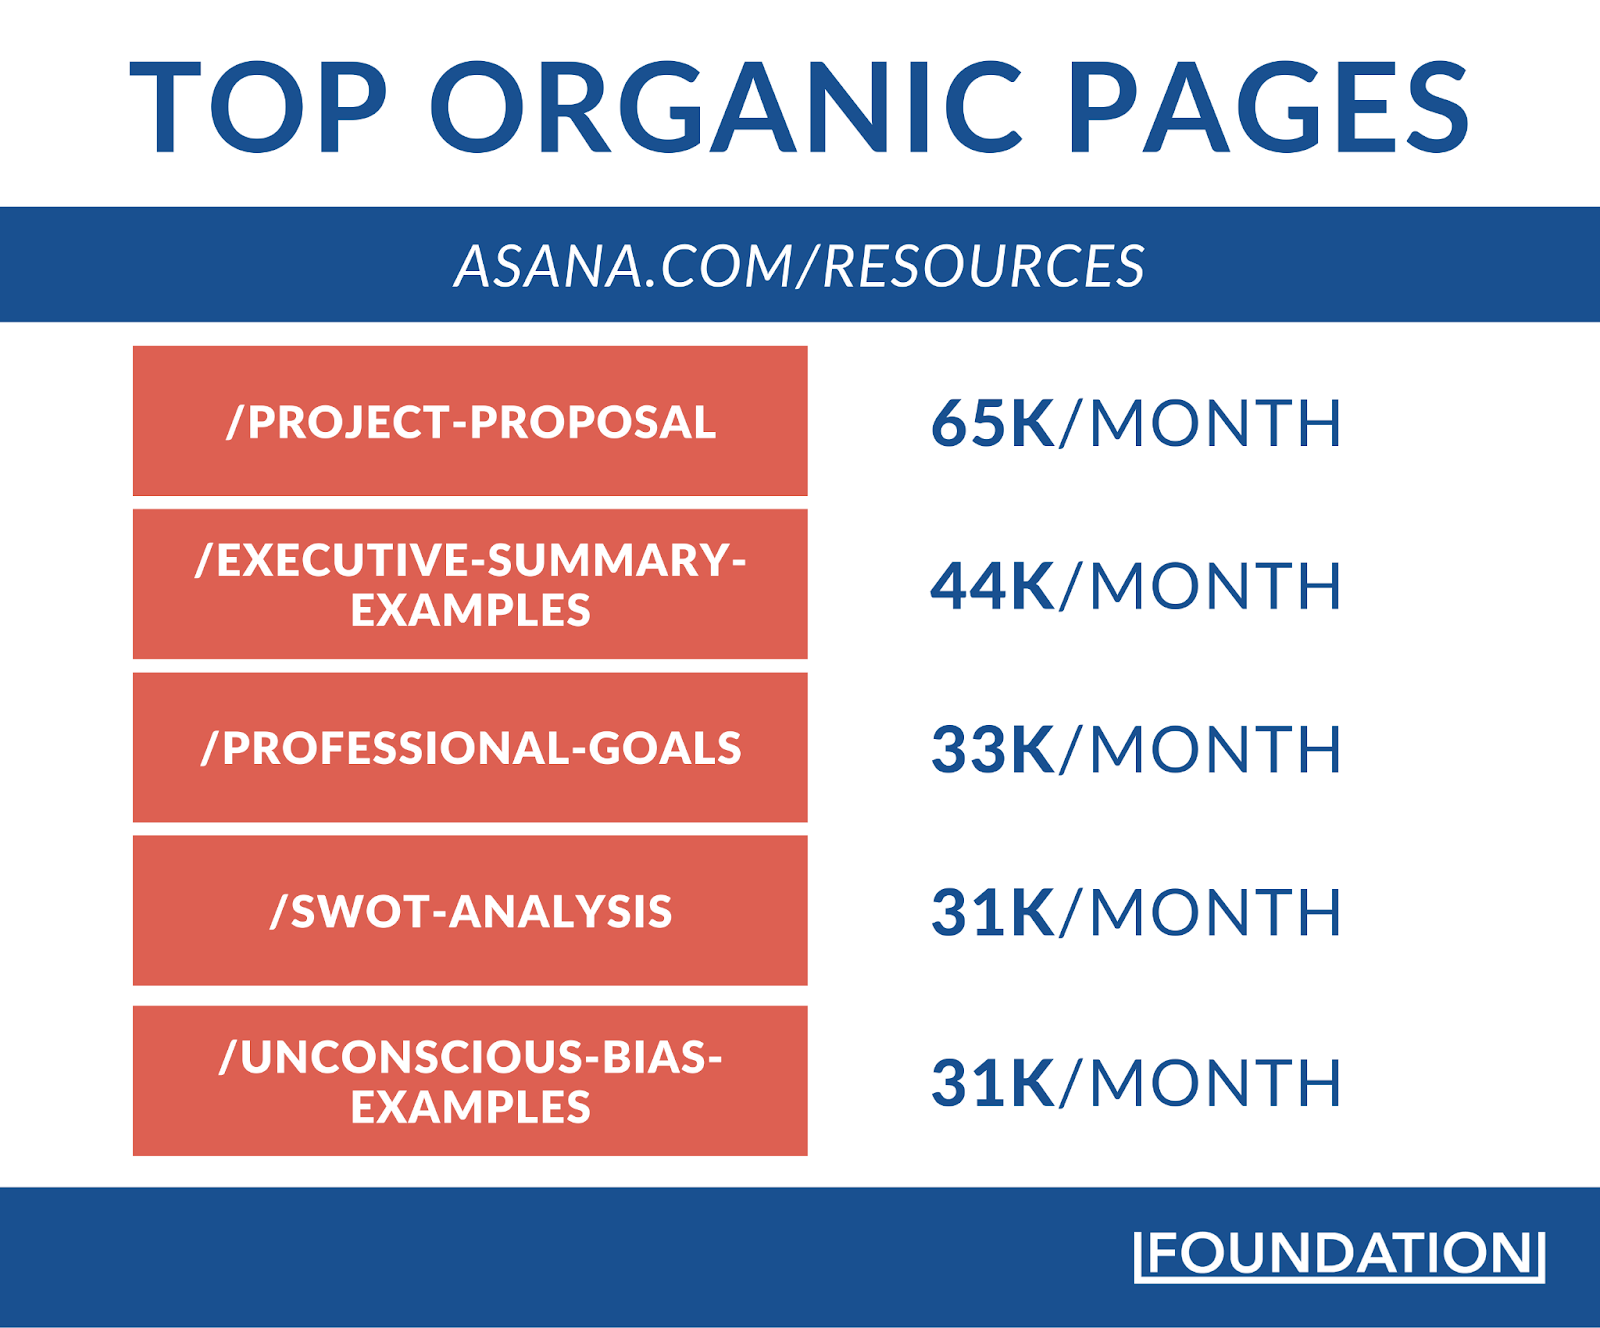 Asana's top blog pages